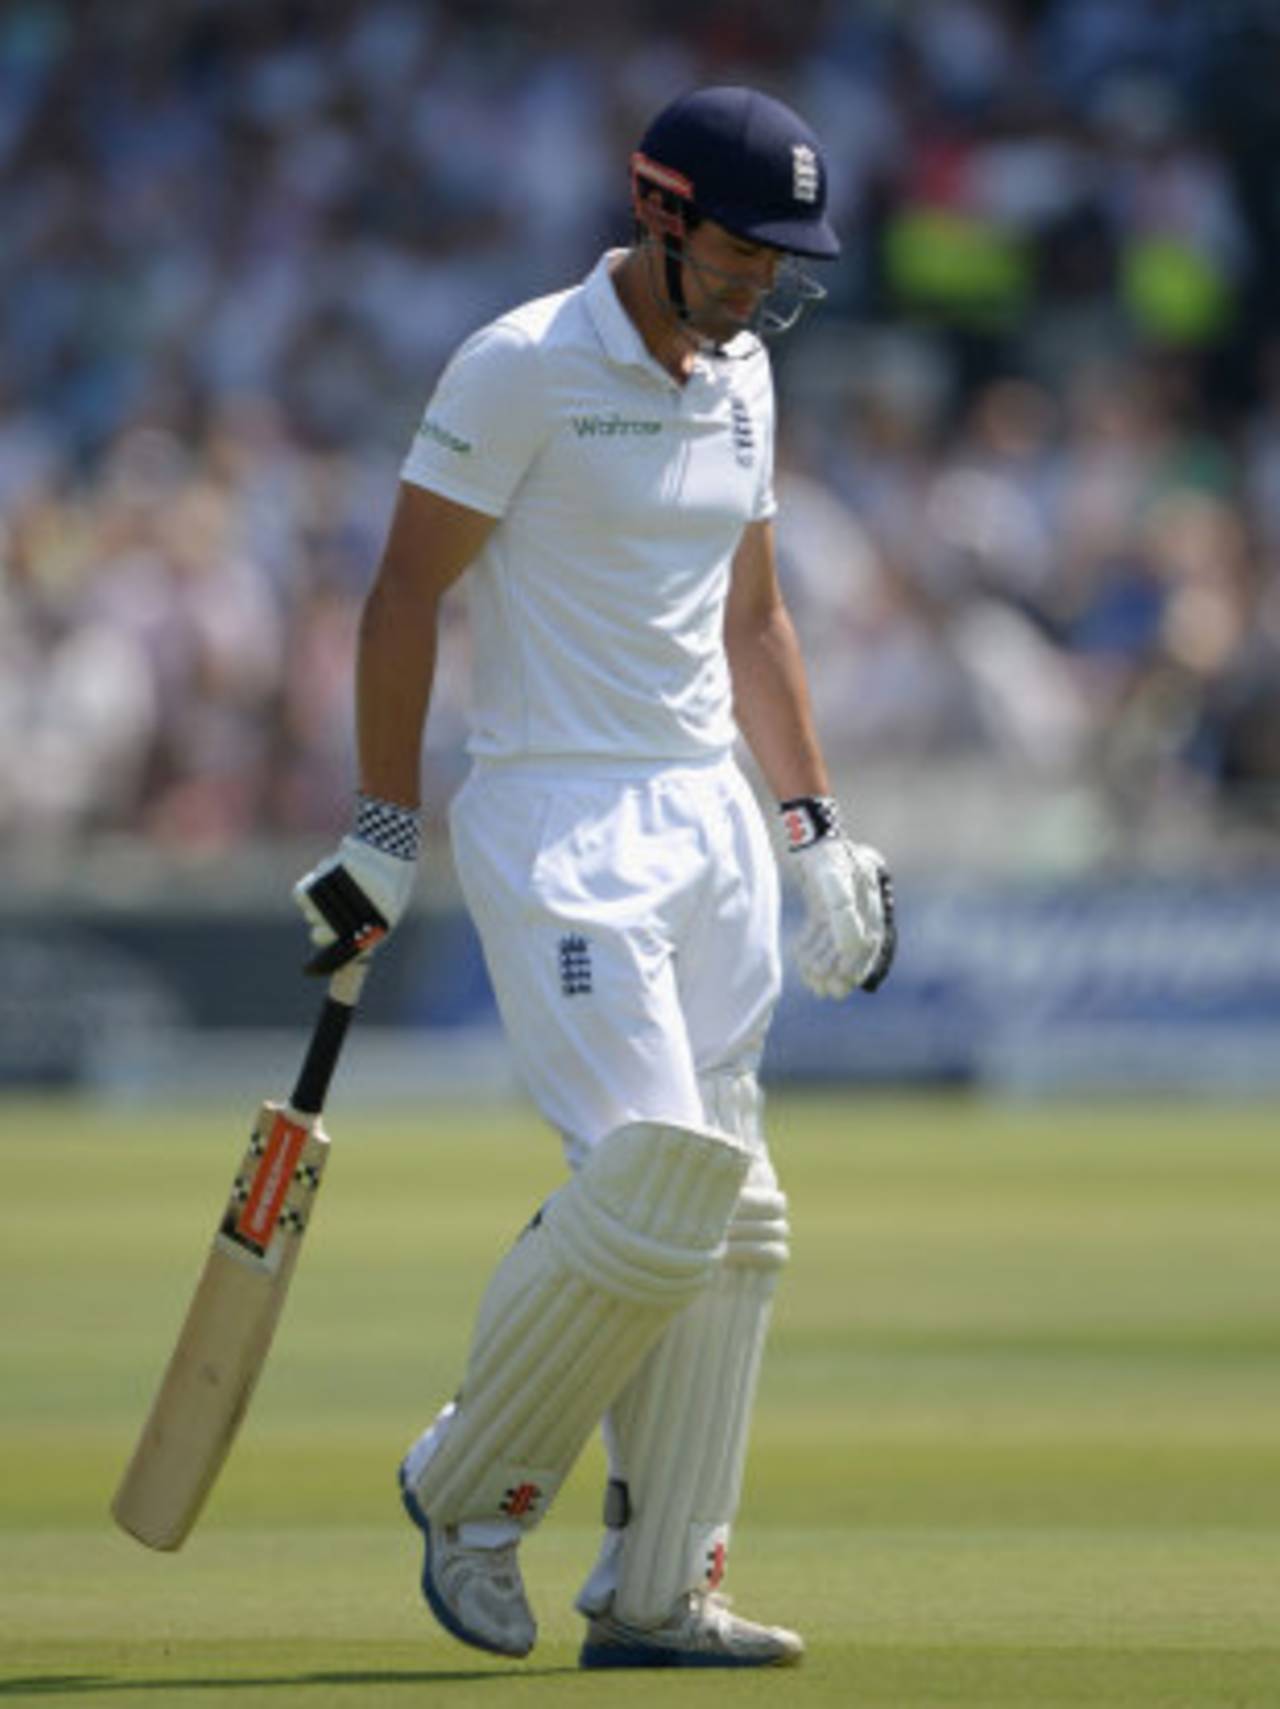 Alastair Cook fell cheaply, again, England v India, 2nd Investec Test, Lord's, 2nd day, July 18, 2014